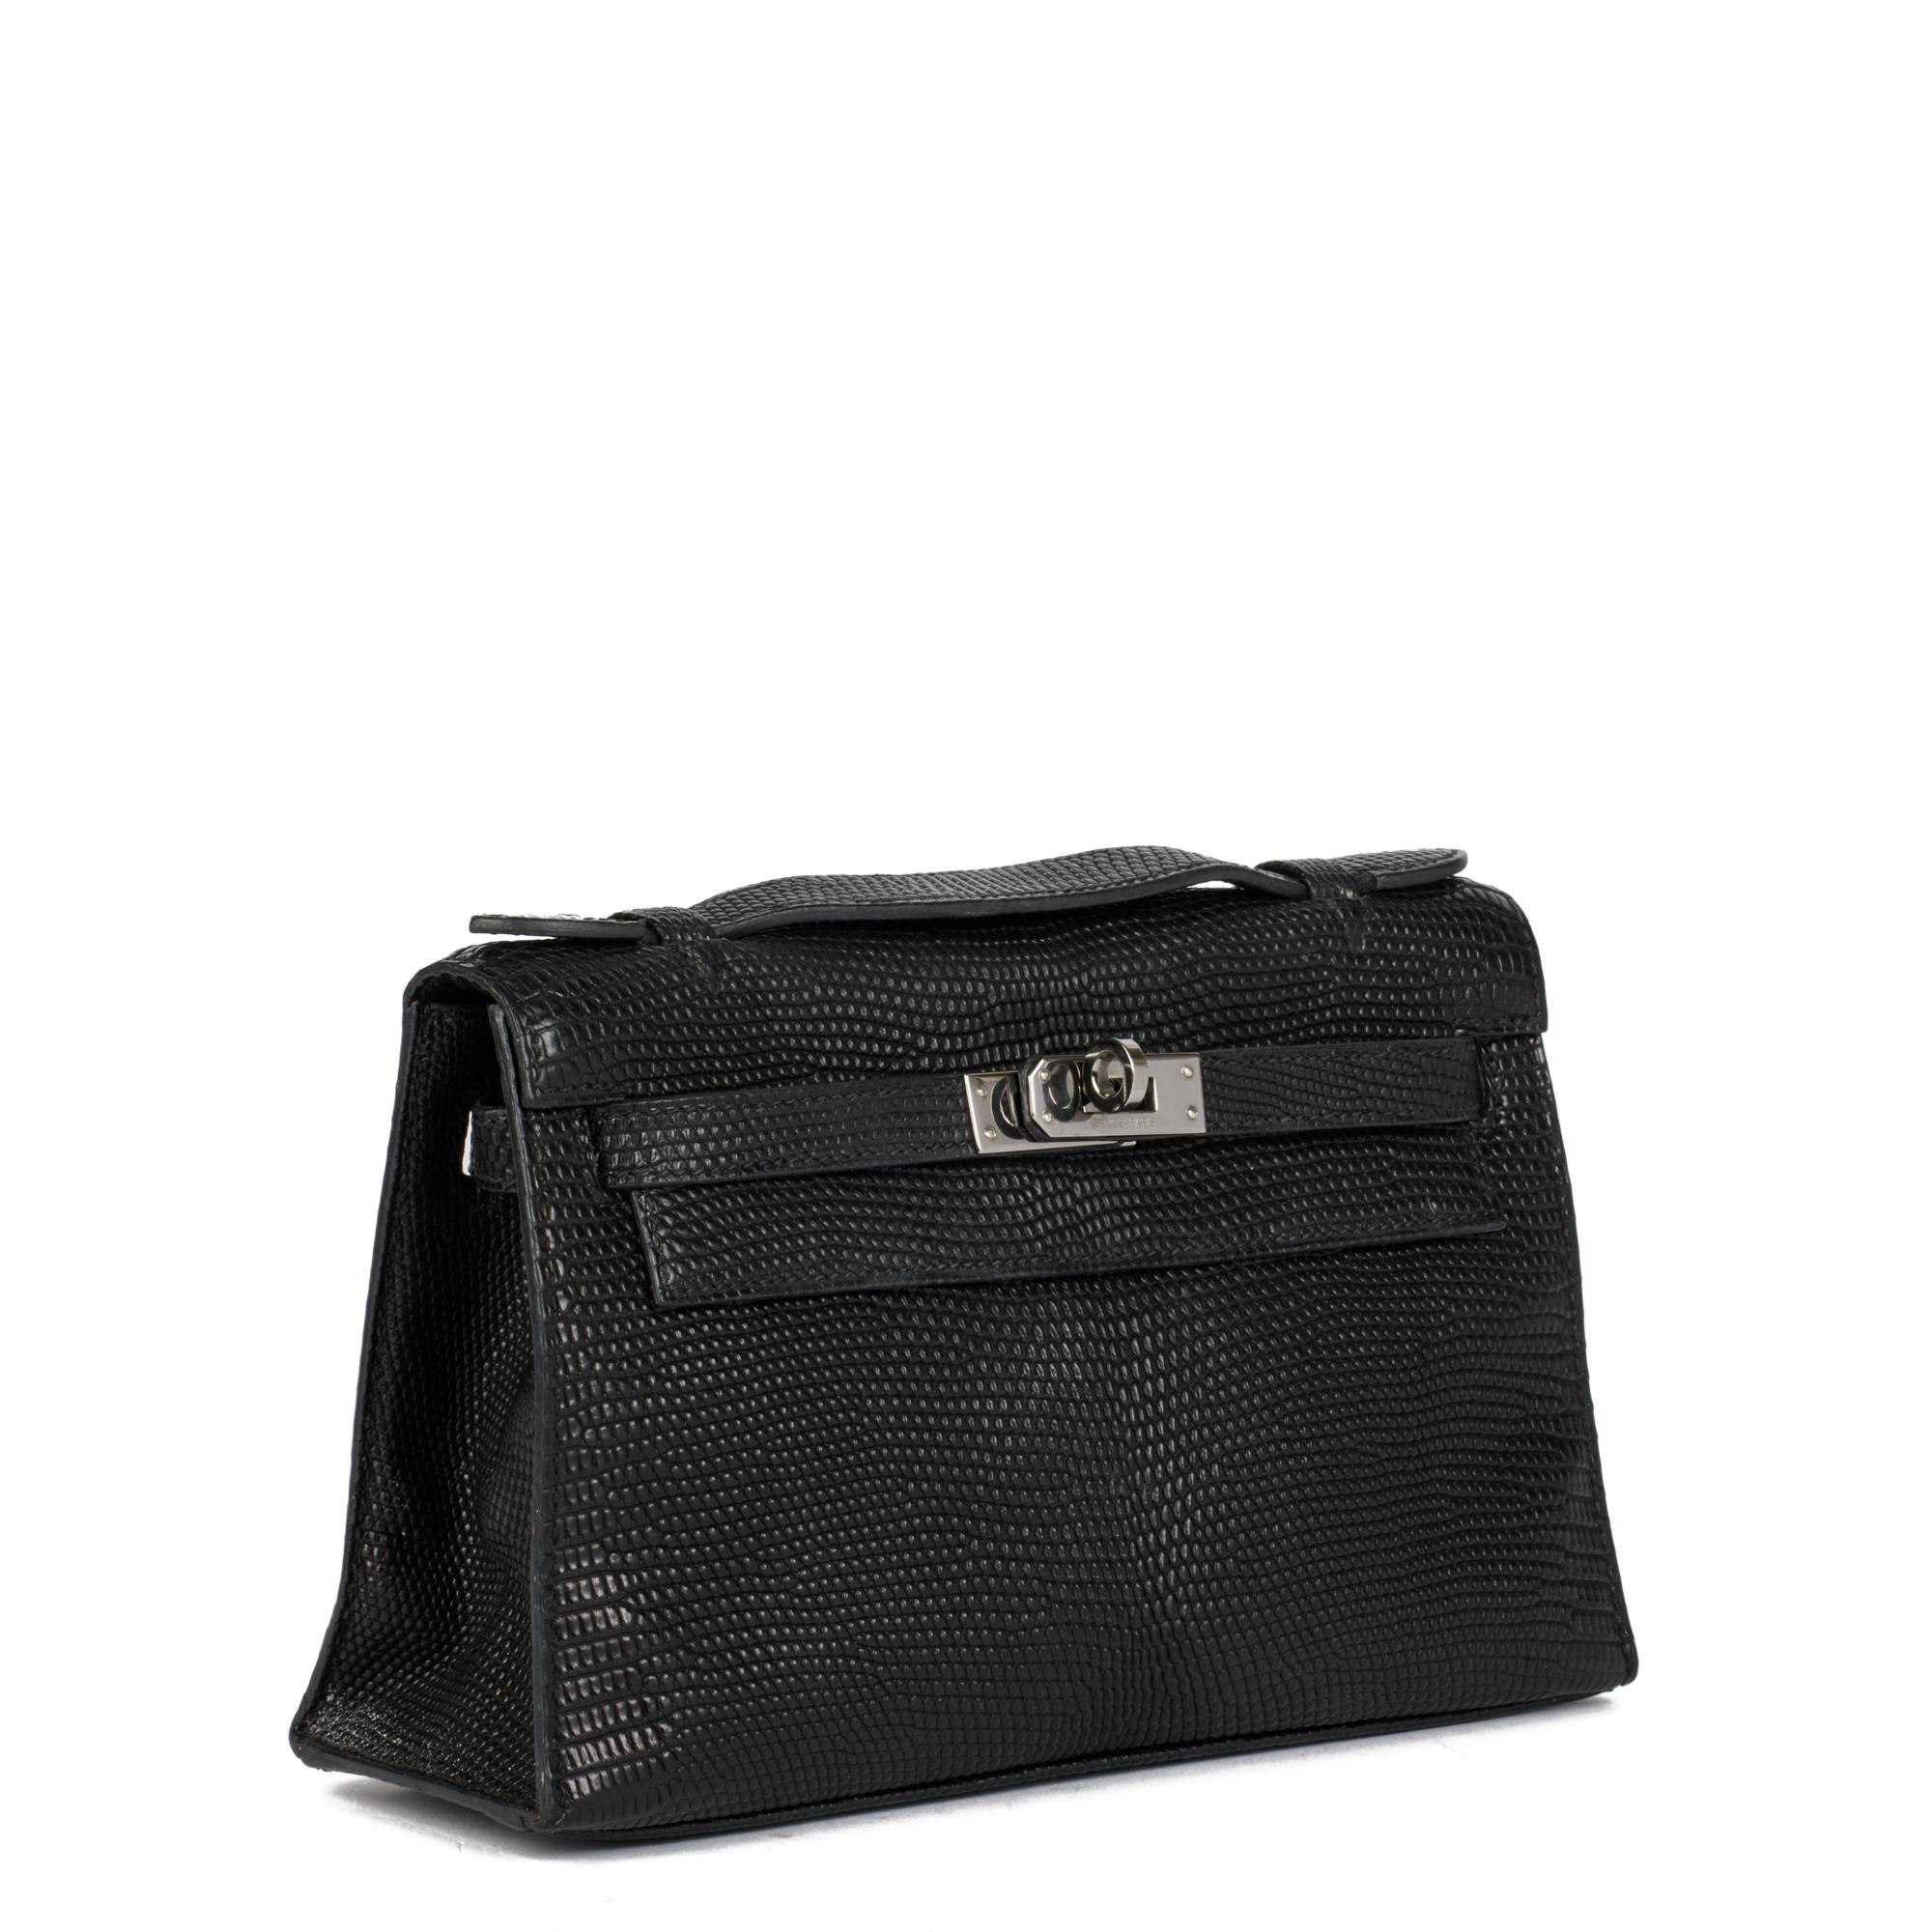 HERMÈS
Black Varanus Salvator Lizard Leather Kelly Pochette

Xupes Reference: CB802
Serial Number: [I]
Age (Circa): 2005
Accompanied By: Hermès Dust Bag, Box, Protective Felt
Authenticity Details: Date Stamp (Made in France)
Gender: Ladies
Type: Top